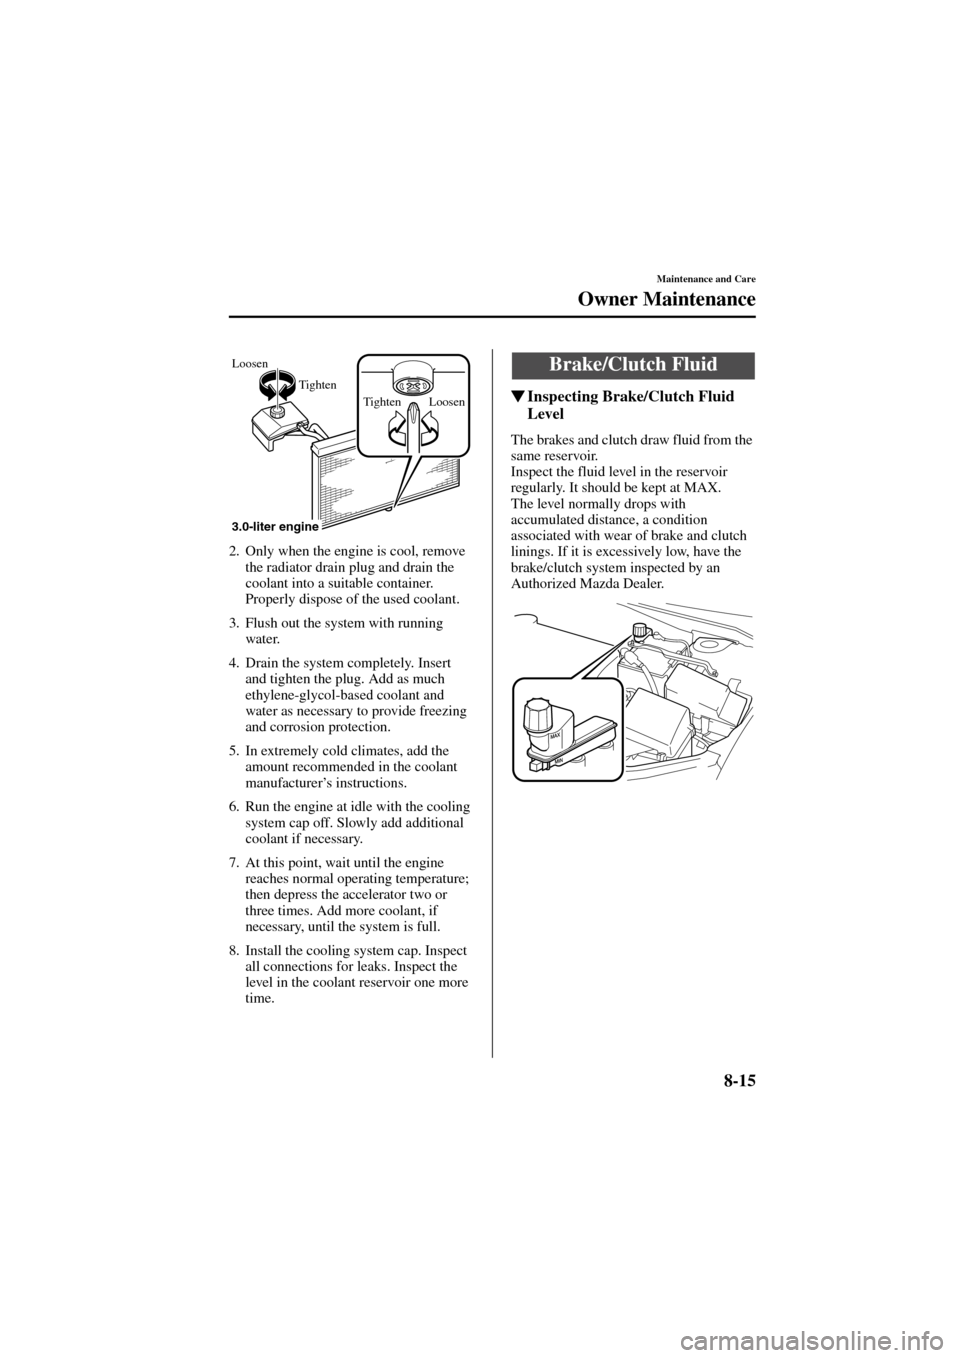 MAZDA MODEL 6 2004   (in English) Owners Guide 8-15
Maintenance and Care
Owner Maintenance
Form No. 8R29-EA-02I
2. Only when the engine is cool, remove 
the radiator drain plug and drain the 
coolant into a suitable container. 
Properly dispose of